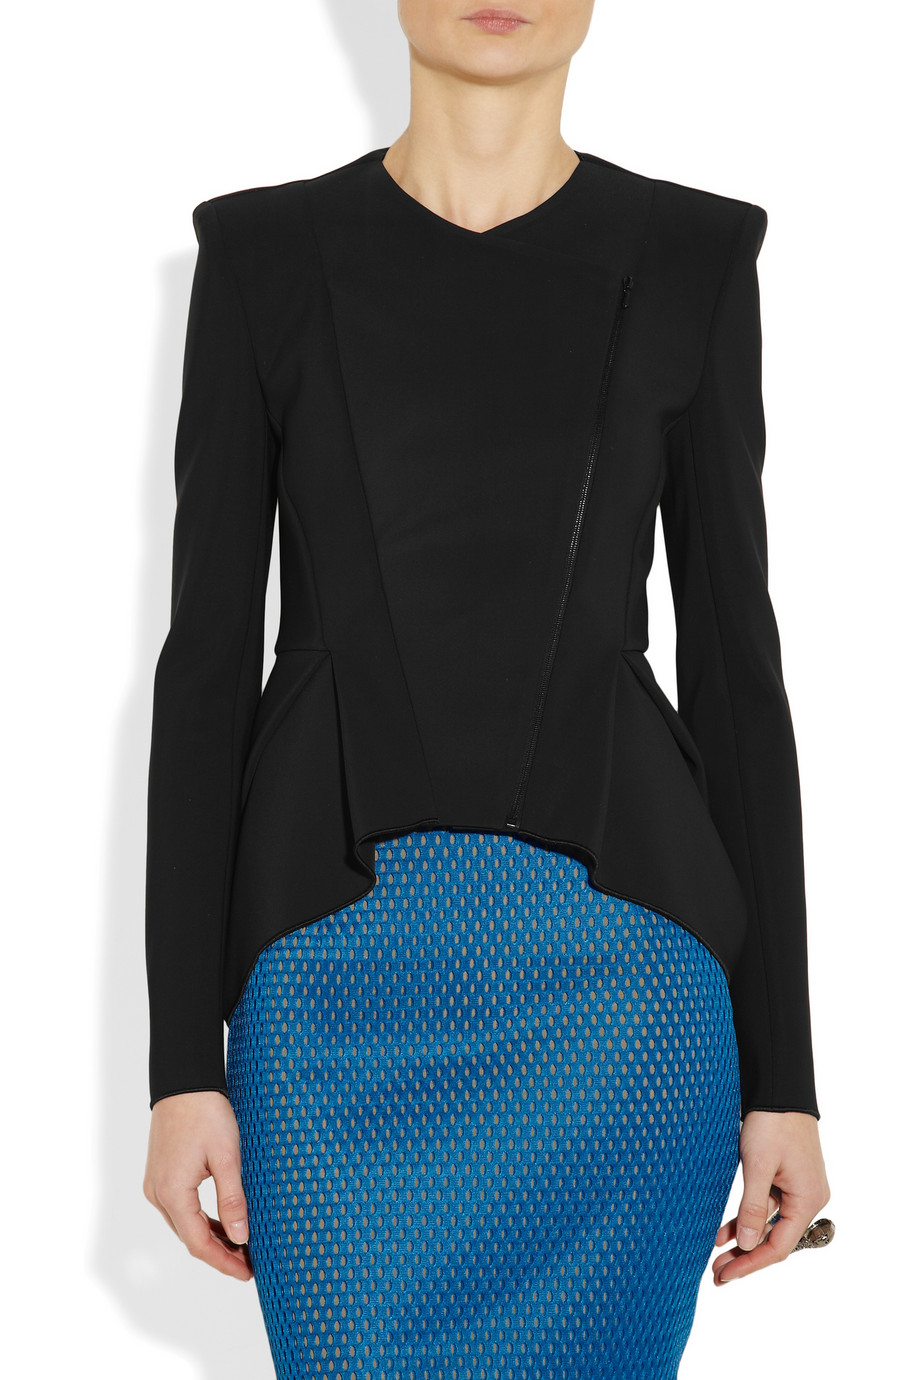 Dion lee Lory 3d Filter Jacket in Black | Lyst